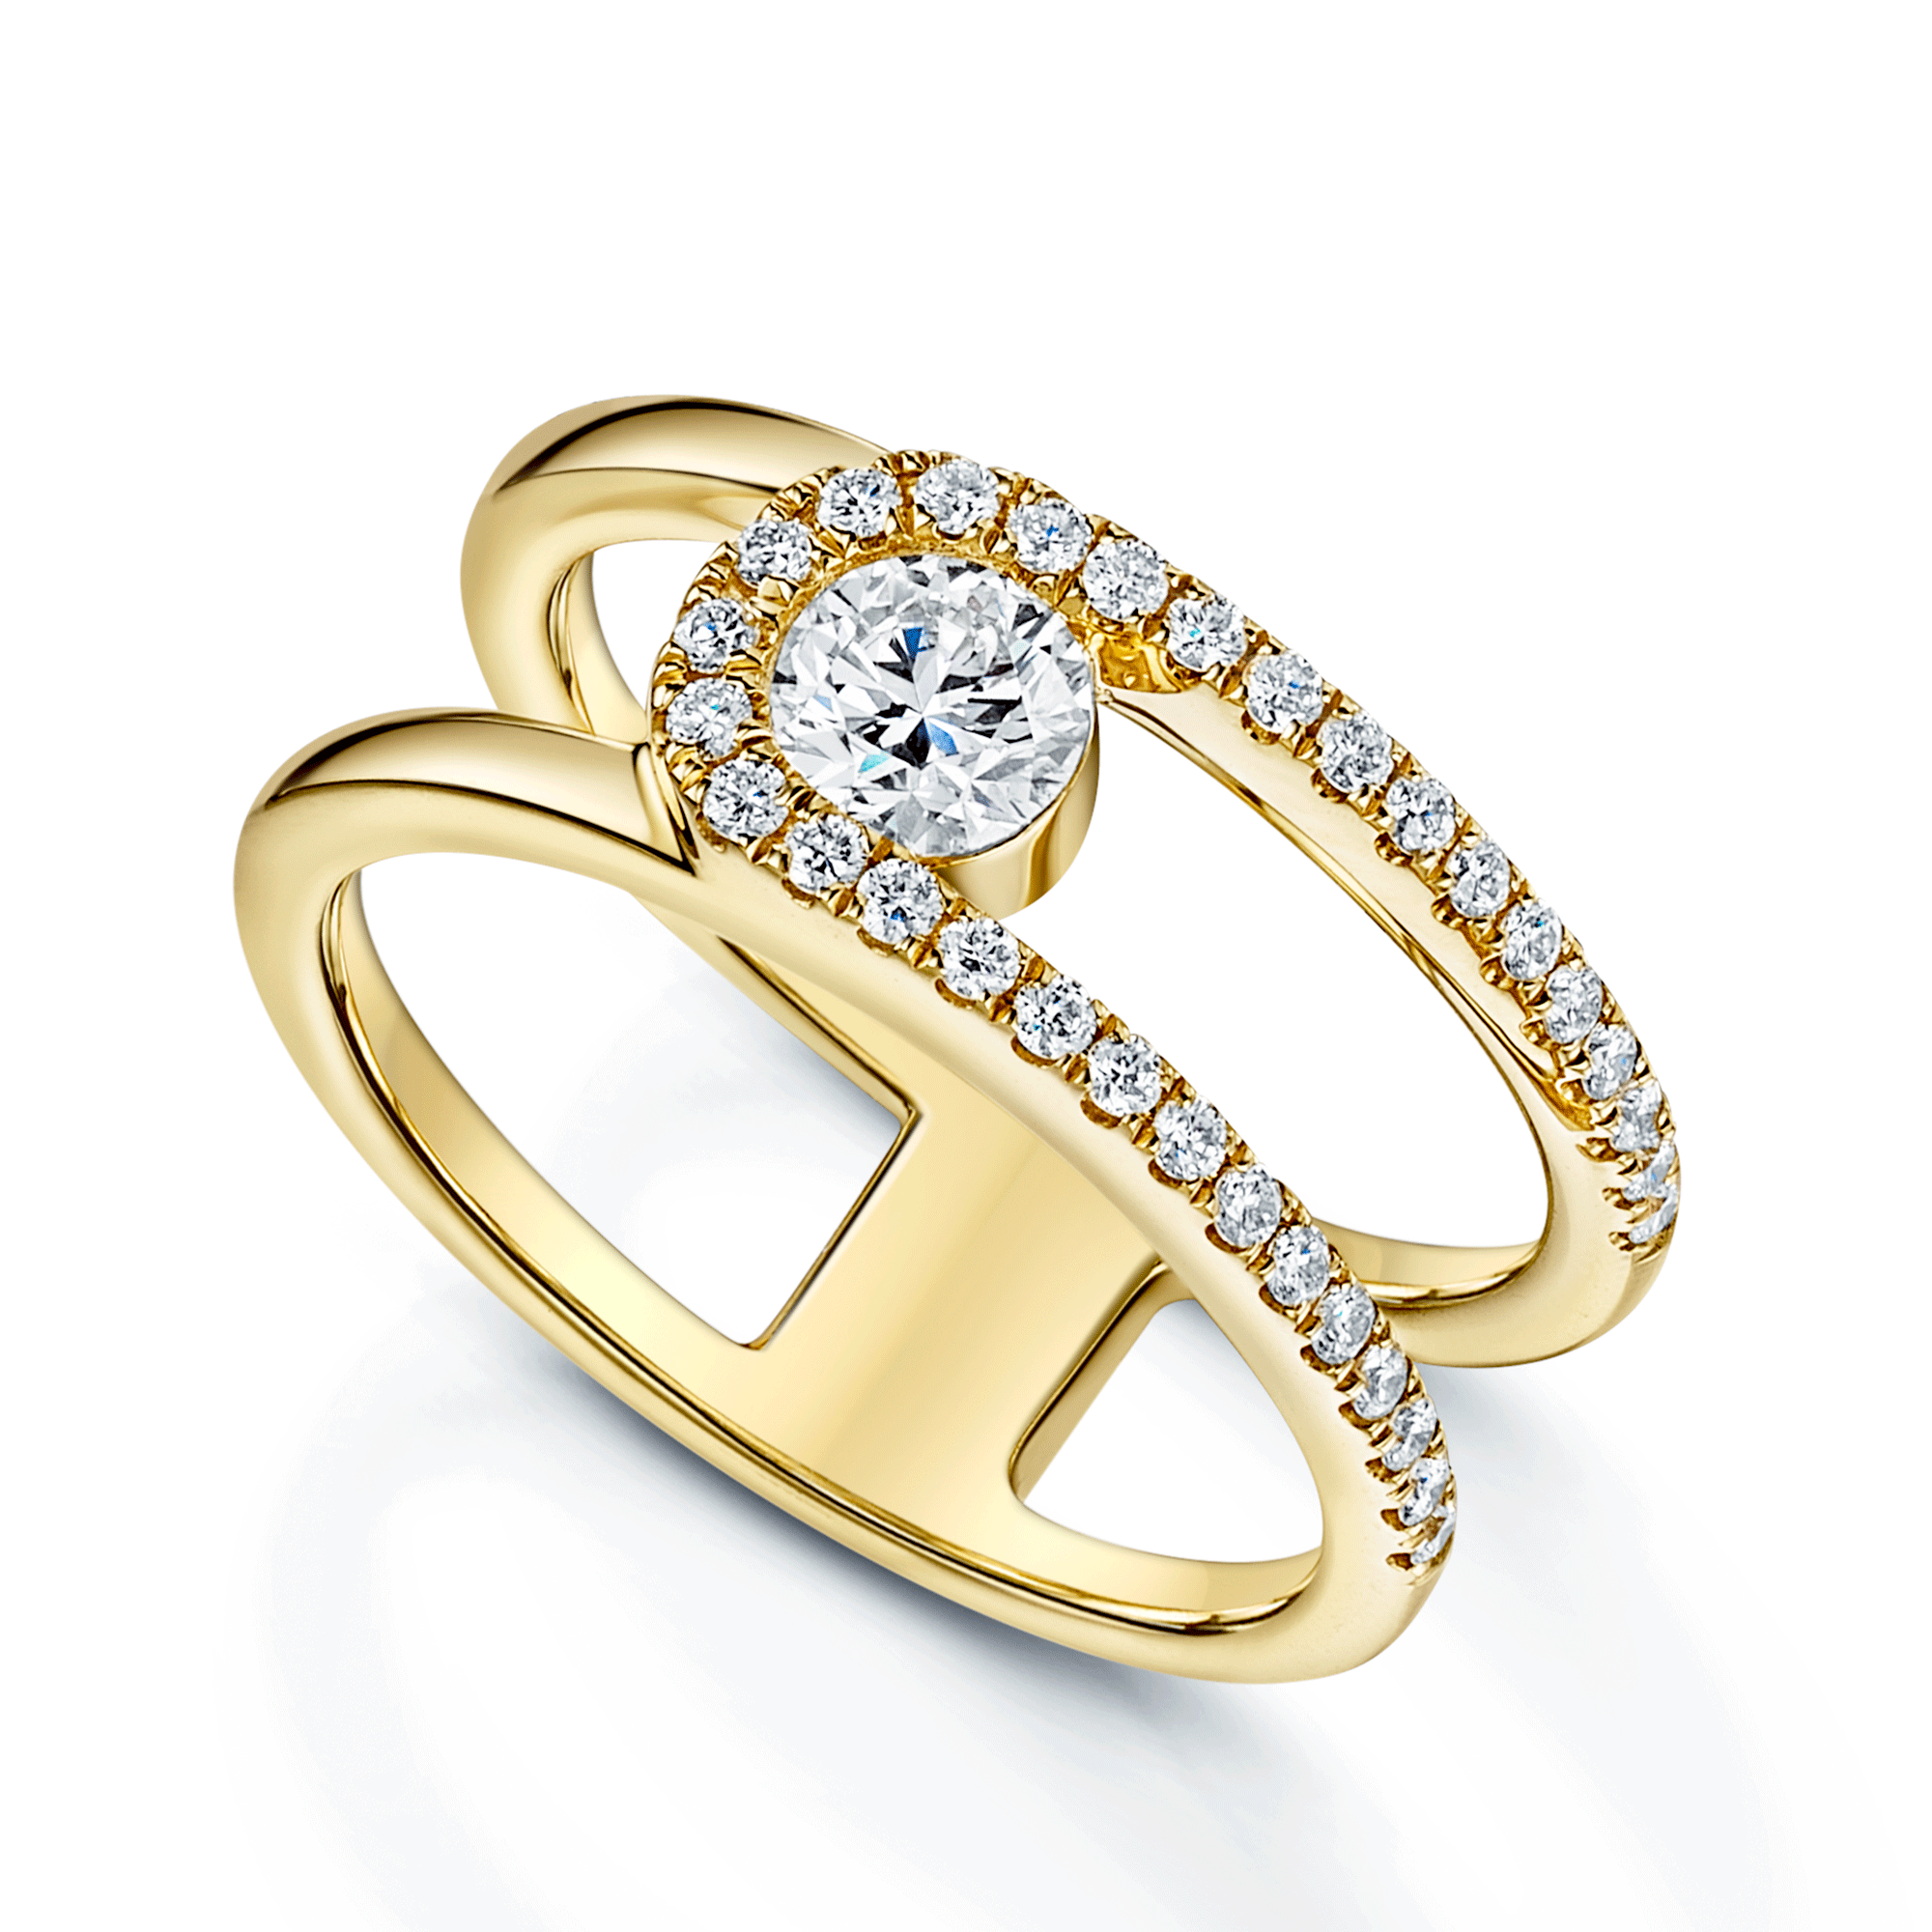 Verve Collection 18ct Yellow Gold GIA Certified Round Brilliant Cut Diamond Dress Ring